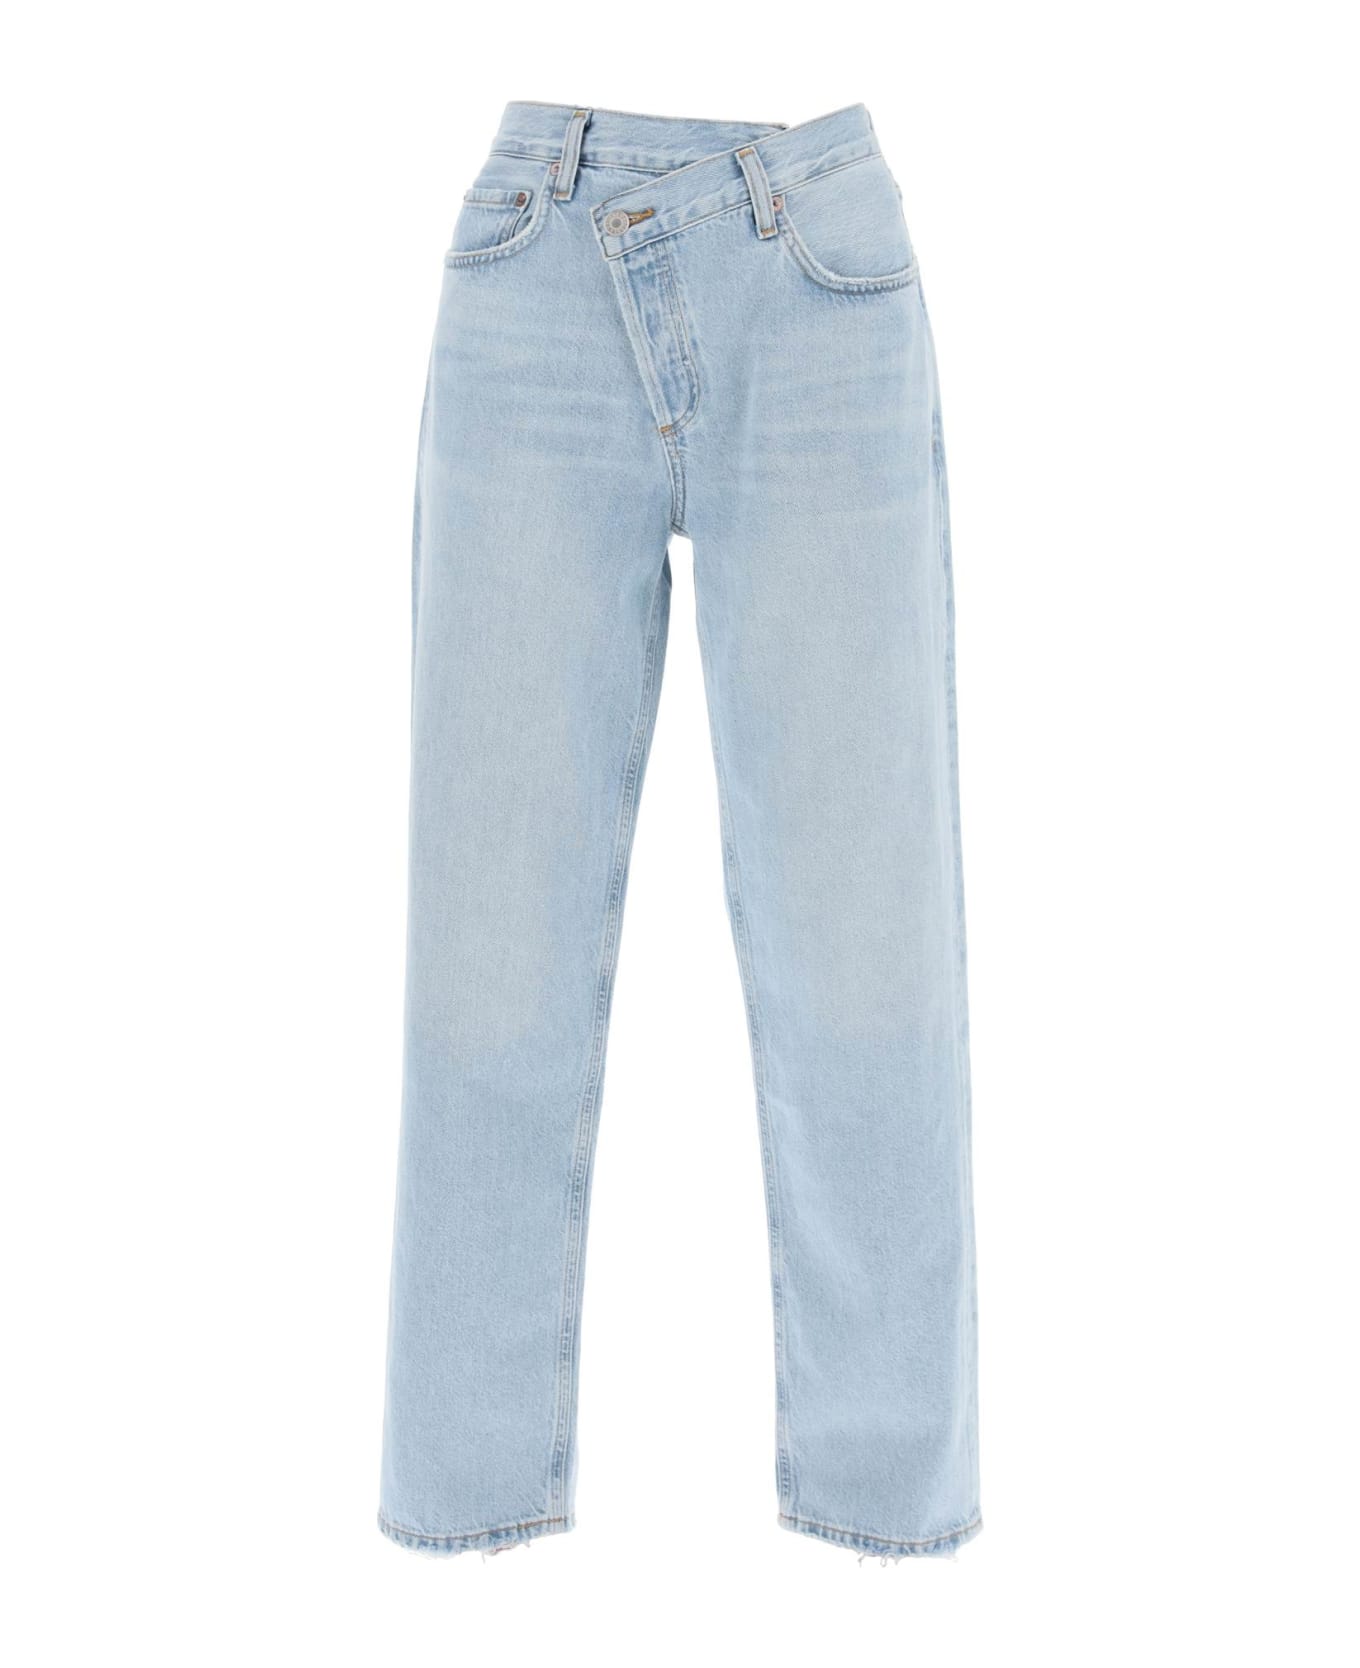 AGOLDE Criss Cross Jeans - WIRED (Light blue)